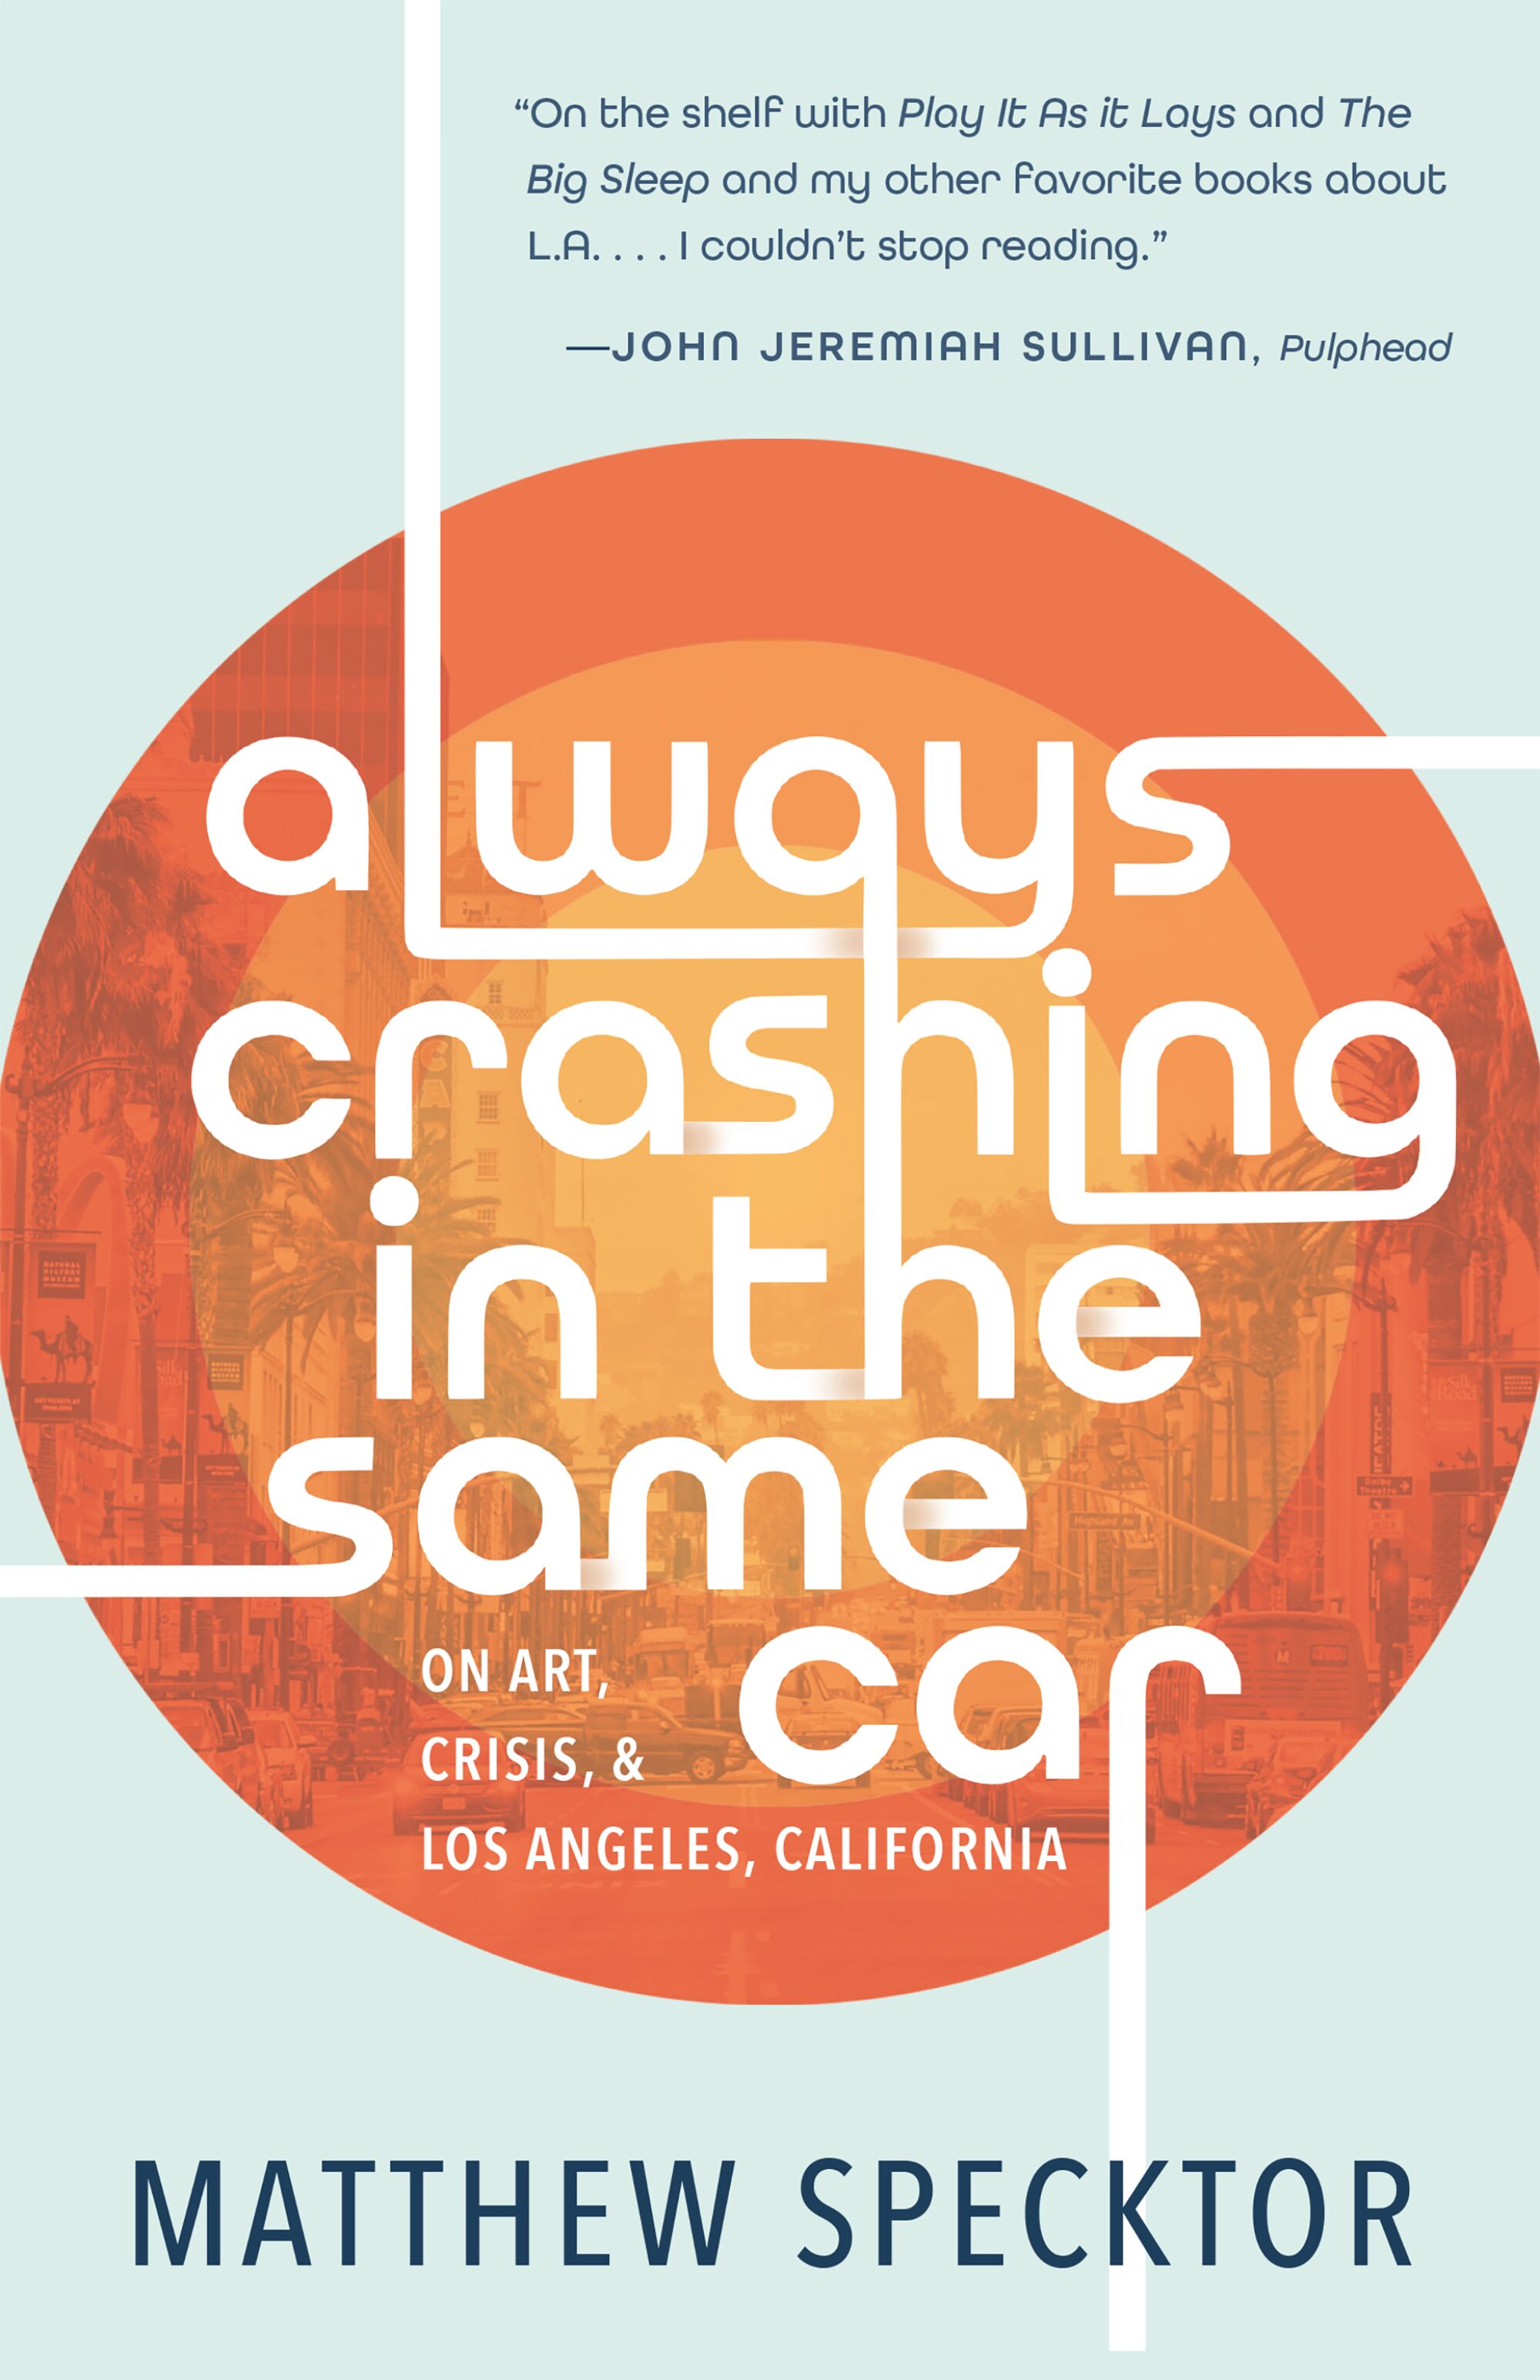 The cover of "Always Crashing in the Same Car: On Art, Crisis, and Los Angeles, California," by Matthew Specktor.